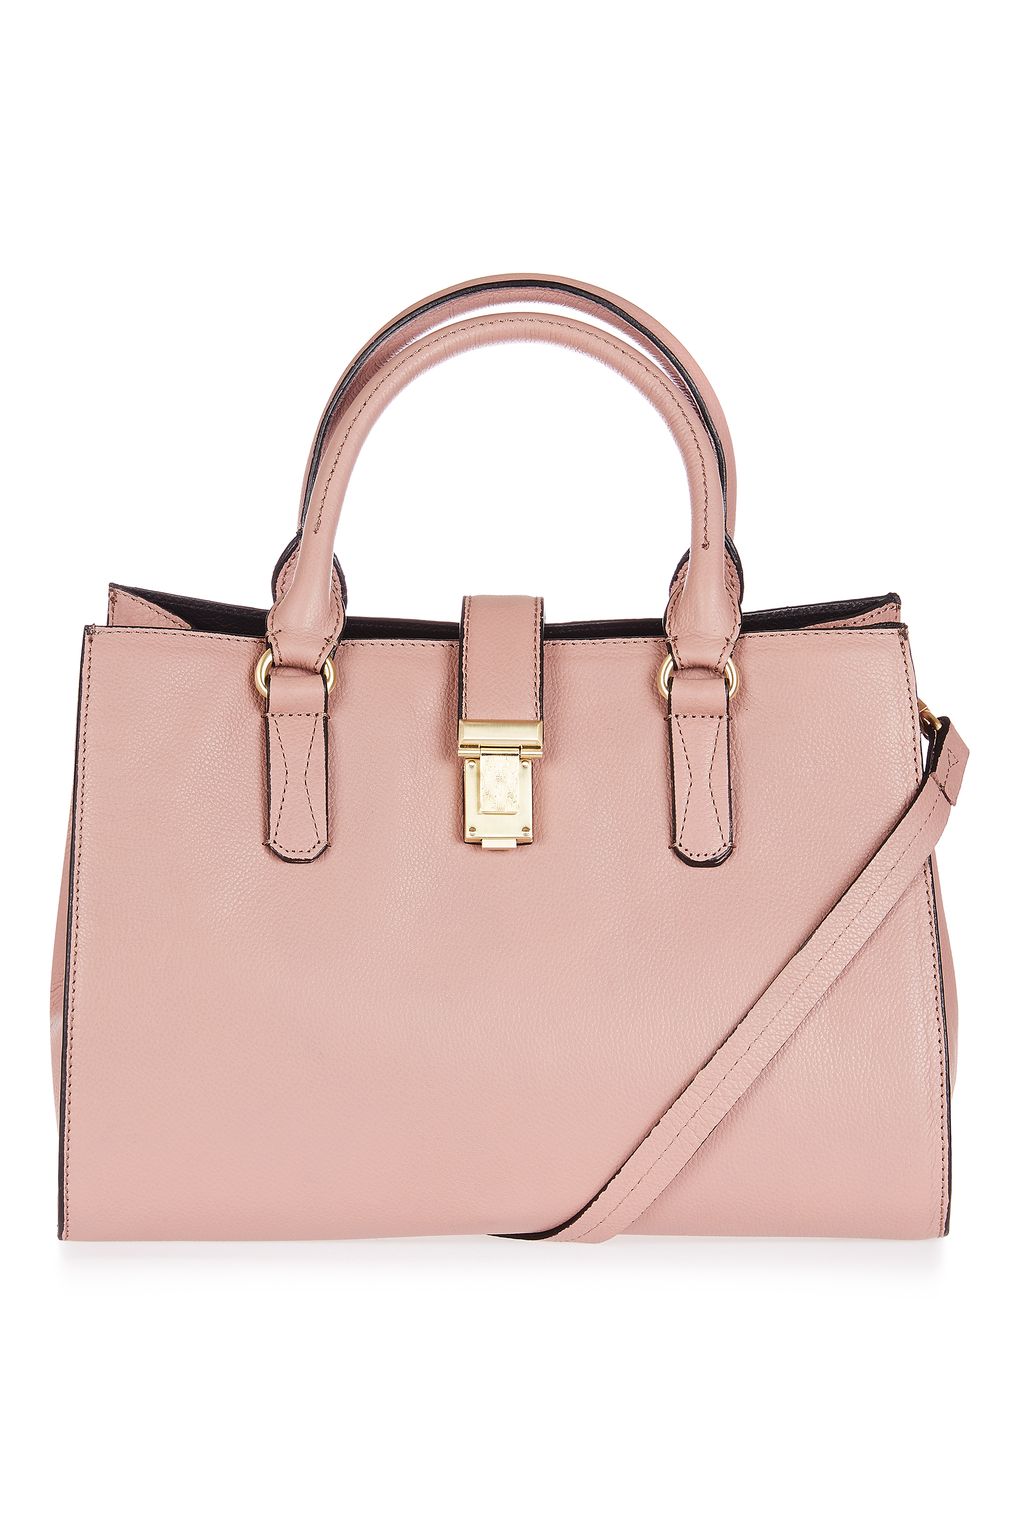 Topshop Holland Leather Lock Holdall